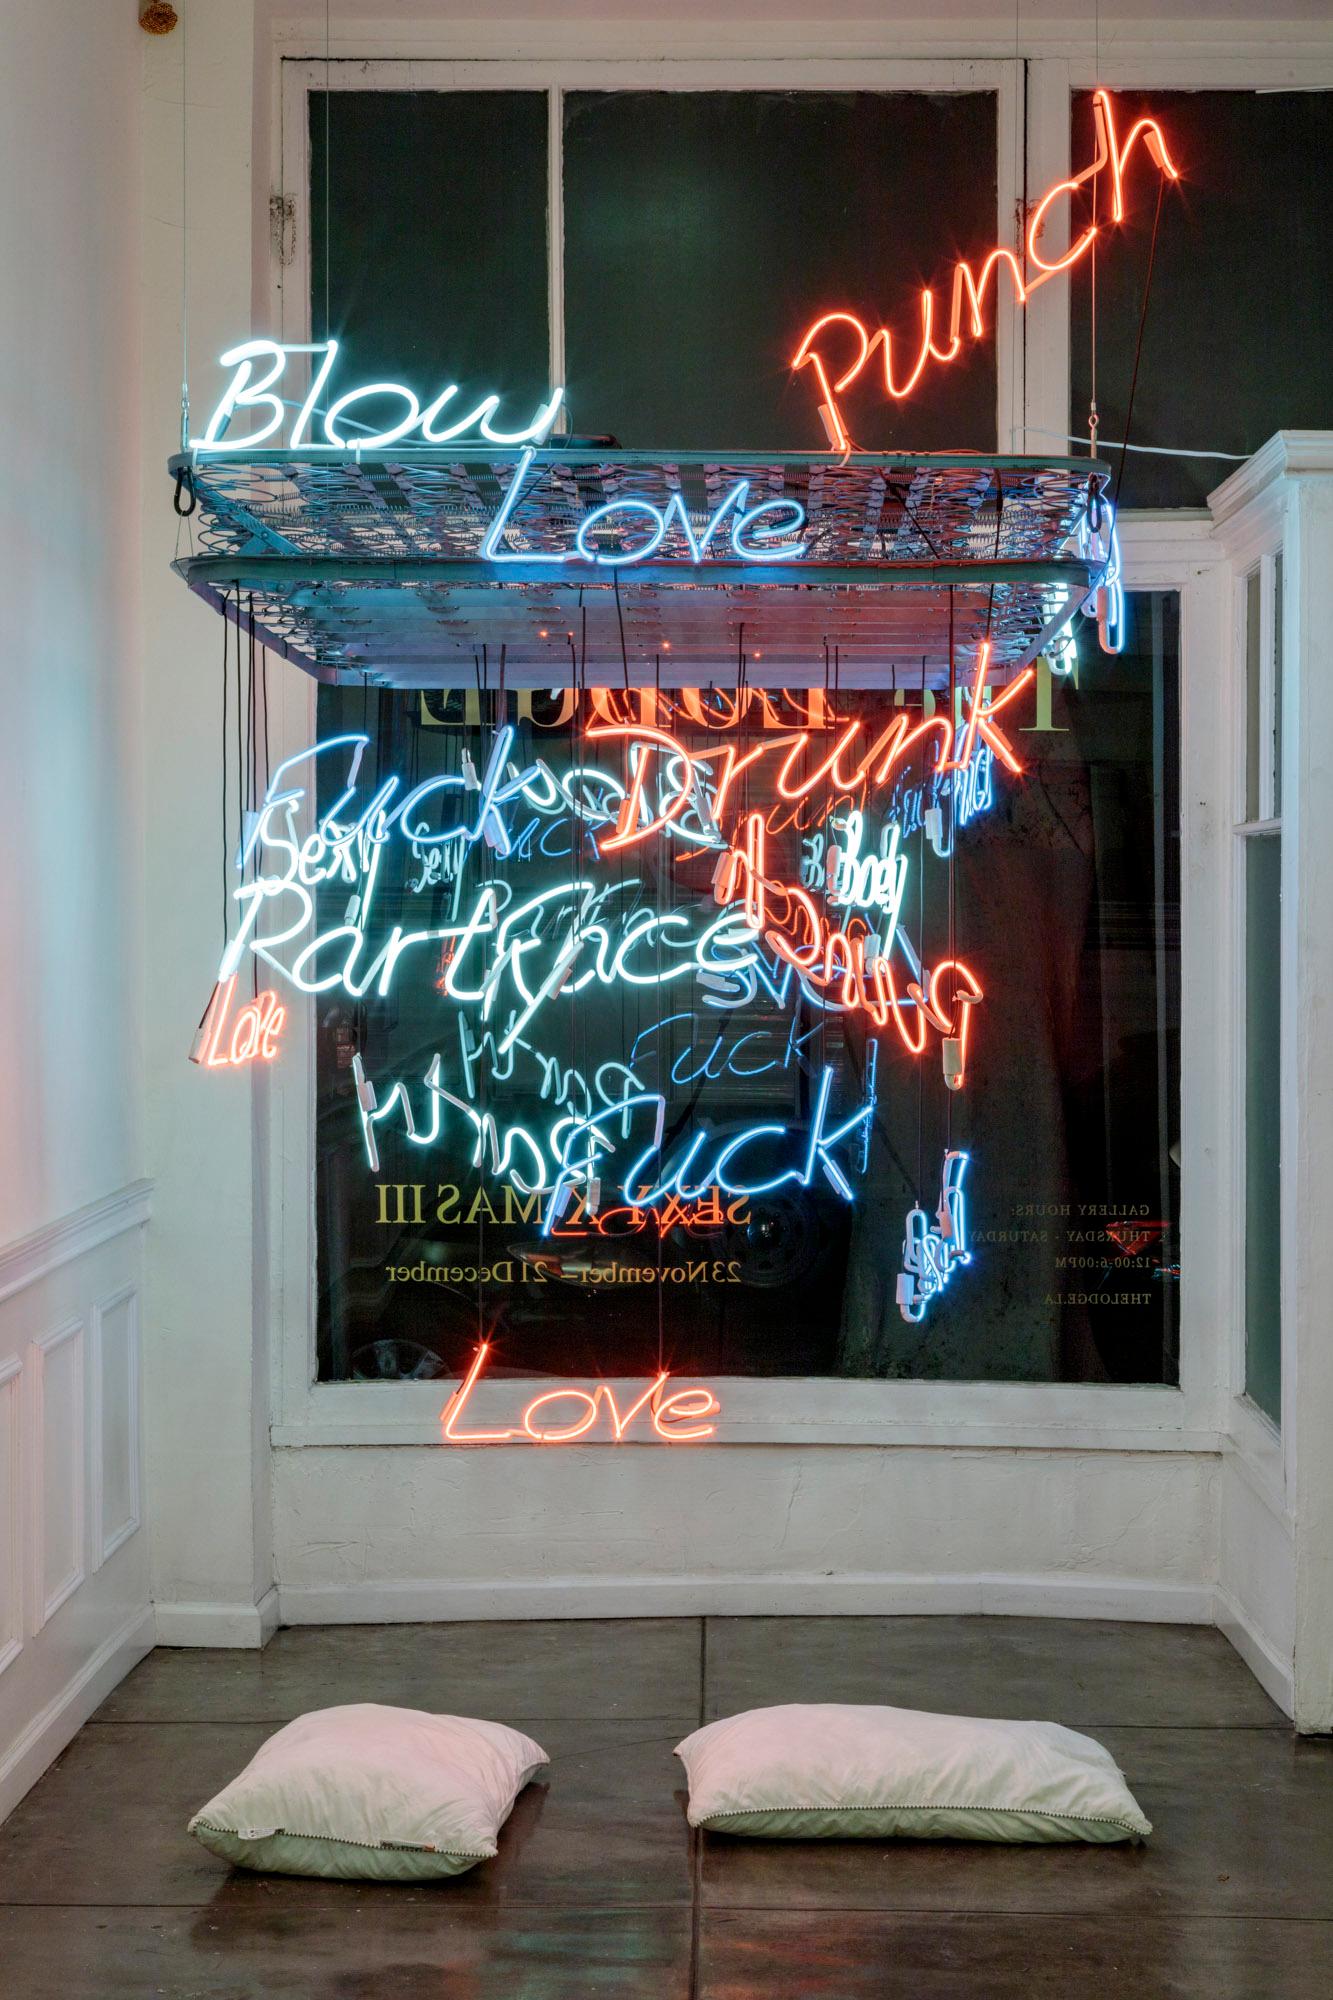 "Looking For Love In All The Wrong Places" Neon Light and Metal Sculpture - Art by Carl Hopgood